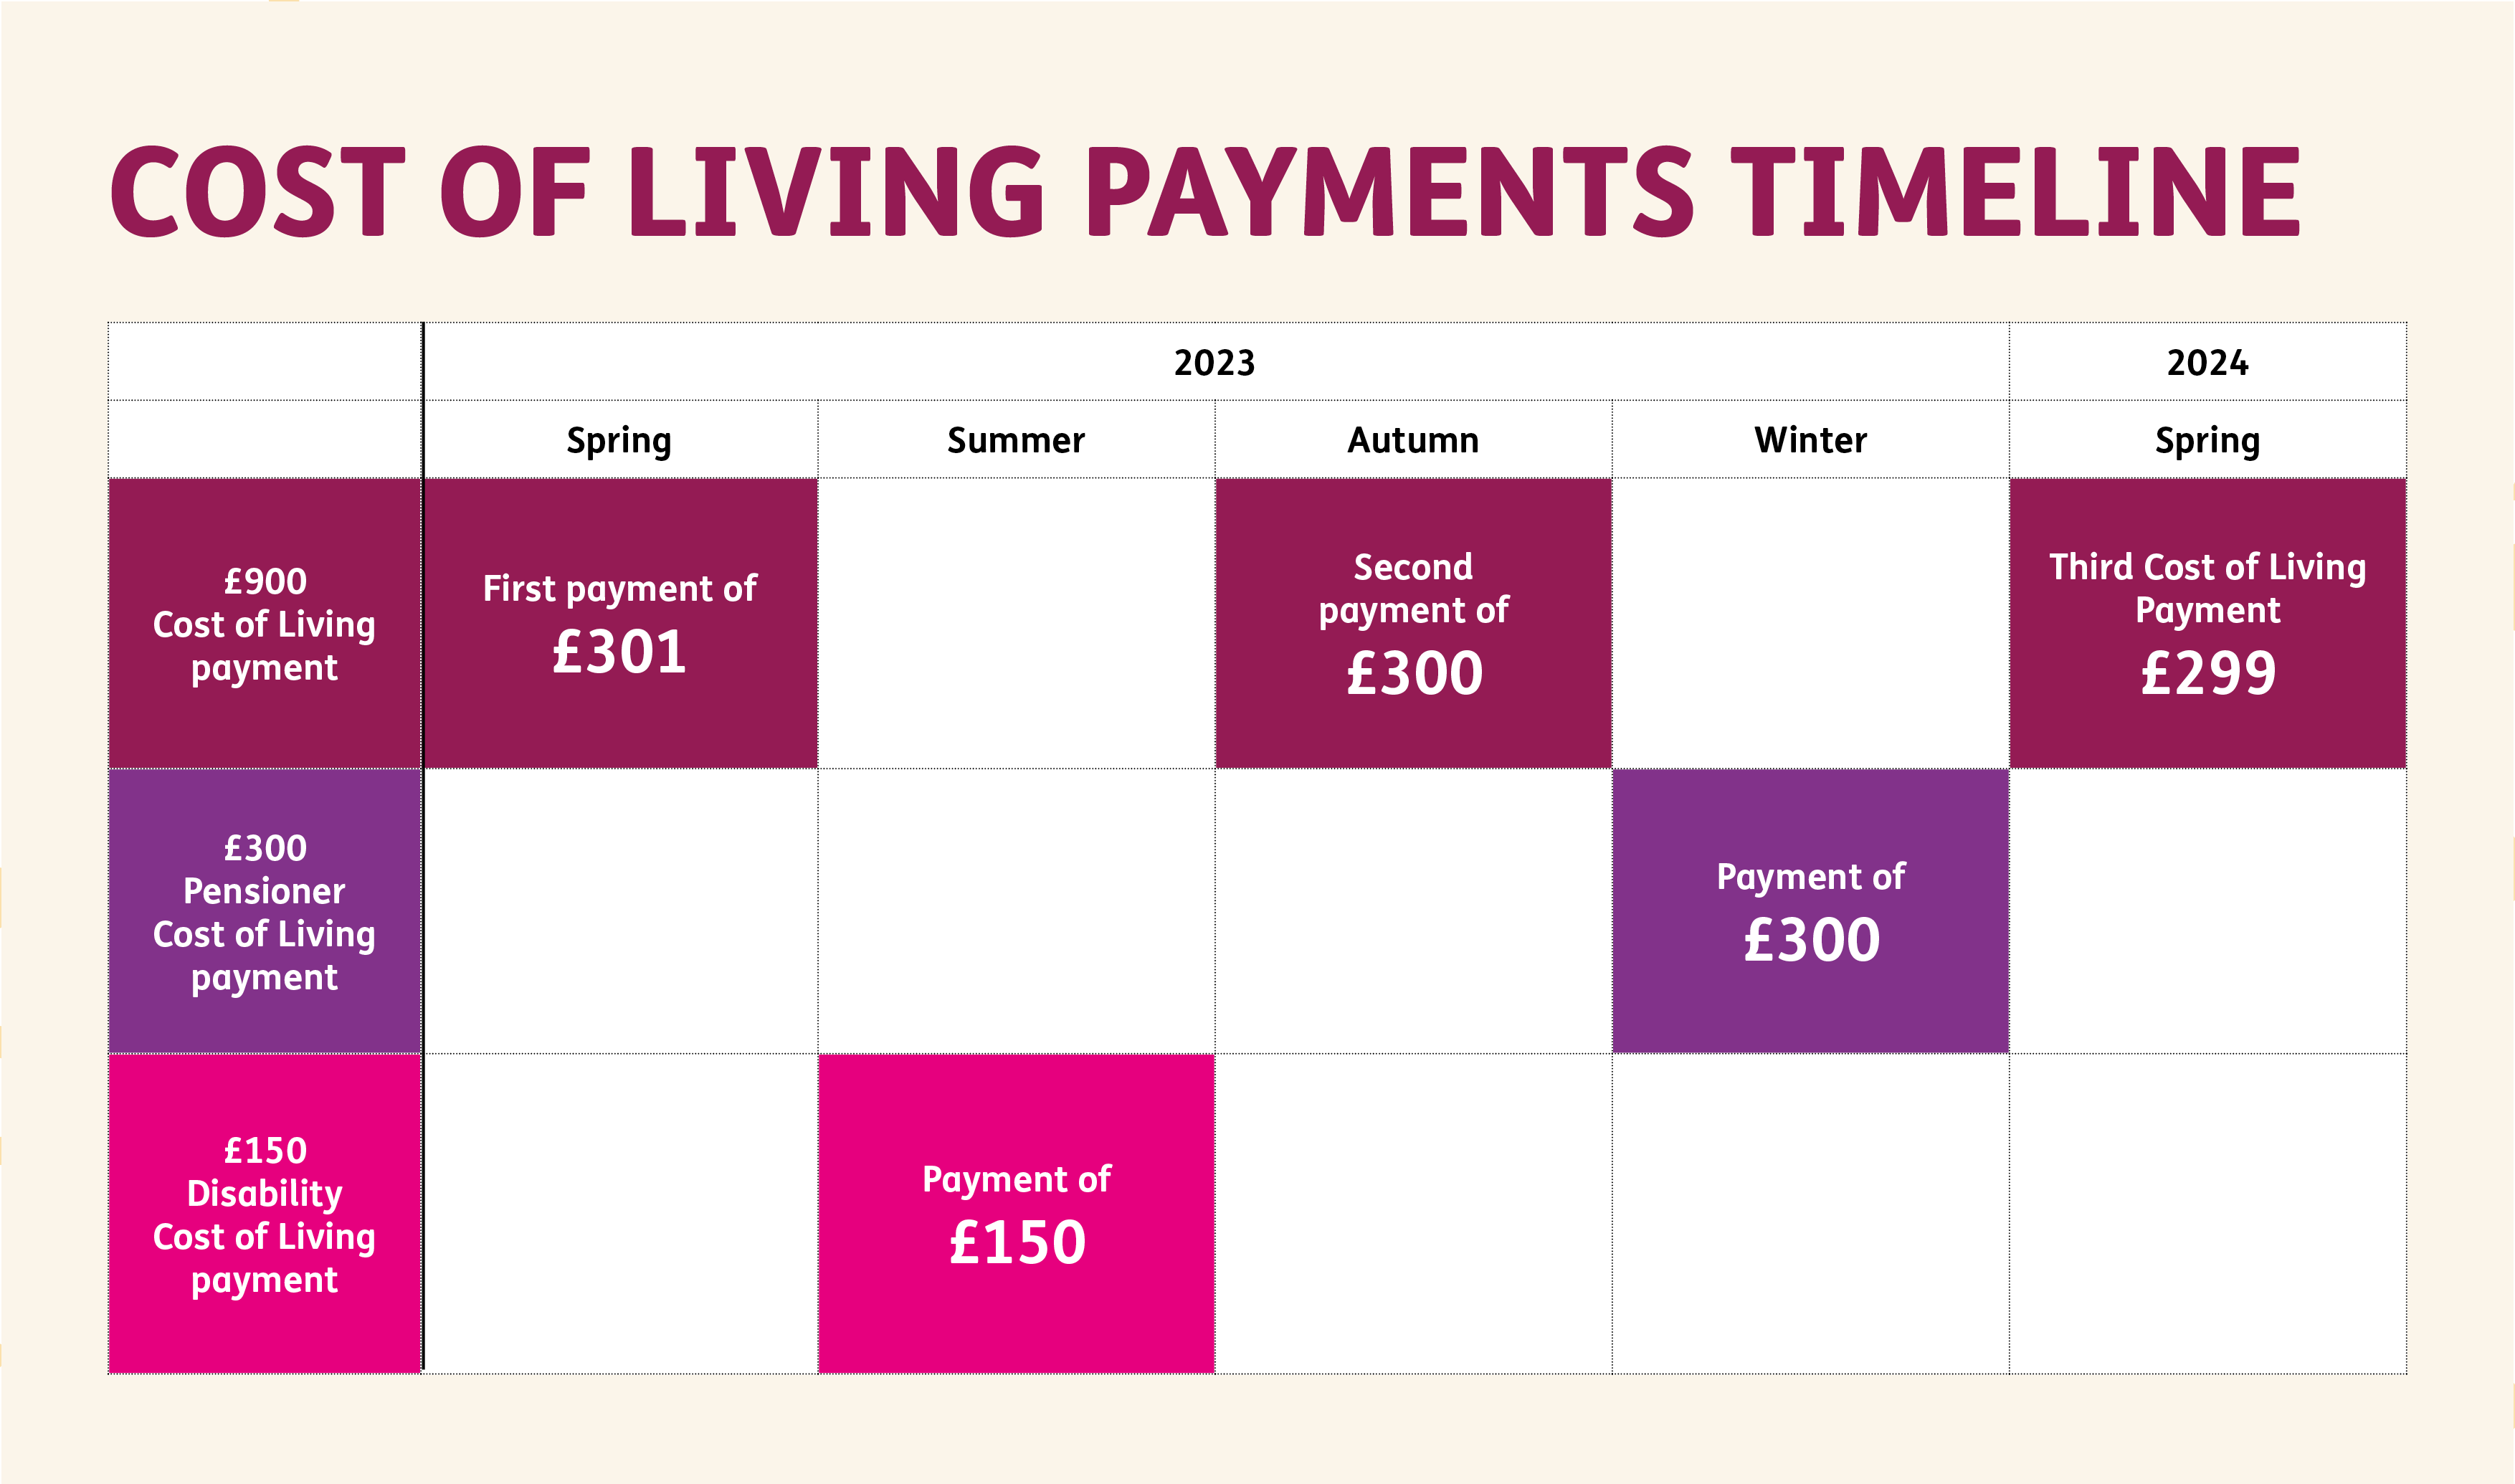 A timetable to show that the first payment of £301 for the £900 cost of living payment is made in the Spring of 2023, the second payment of £300 is made in the autumn of 2023 and the third payment in the Spring of 2024. The graph also shows that the £300 Pensioner cost of living payment will be made in the Winter of 2023 and the £150 Disability cost of living payment will be made in the summer of 2023